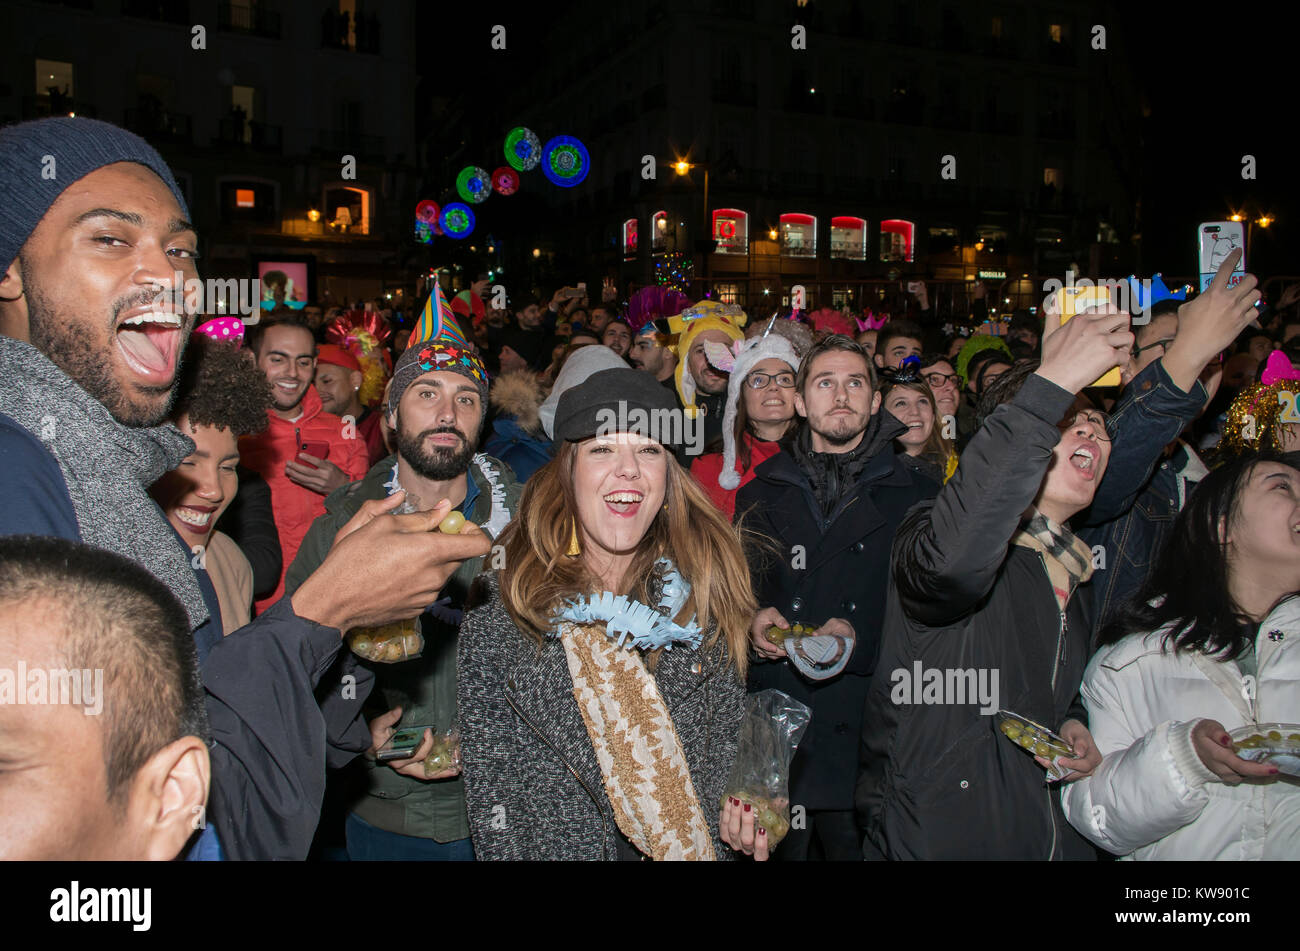 Madrid, Spain. 31st Dec, 2017. Thousands of people gathered at the central square of Madrid Puerta del Sol to welcome the new year and have the traitional 12 lucky grapes. Credit: Lora Grigorova/Alamy Live News Stock Photo